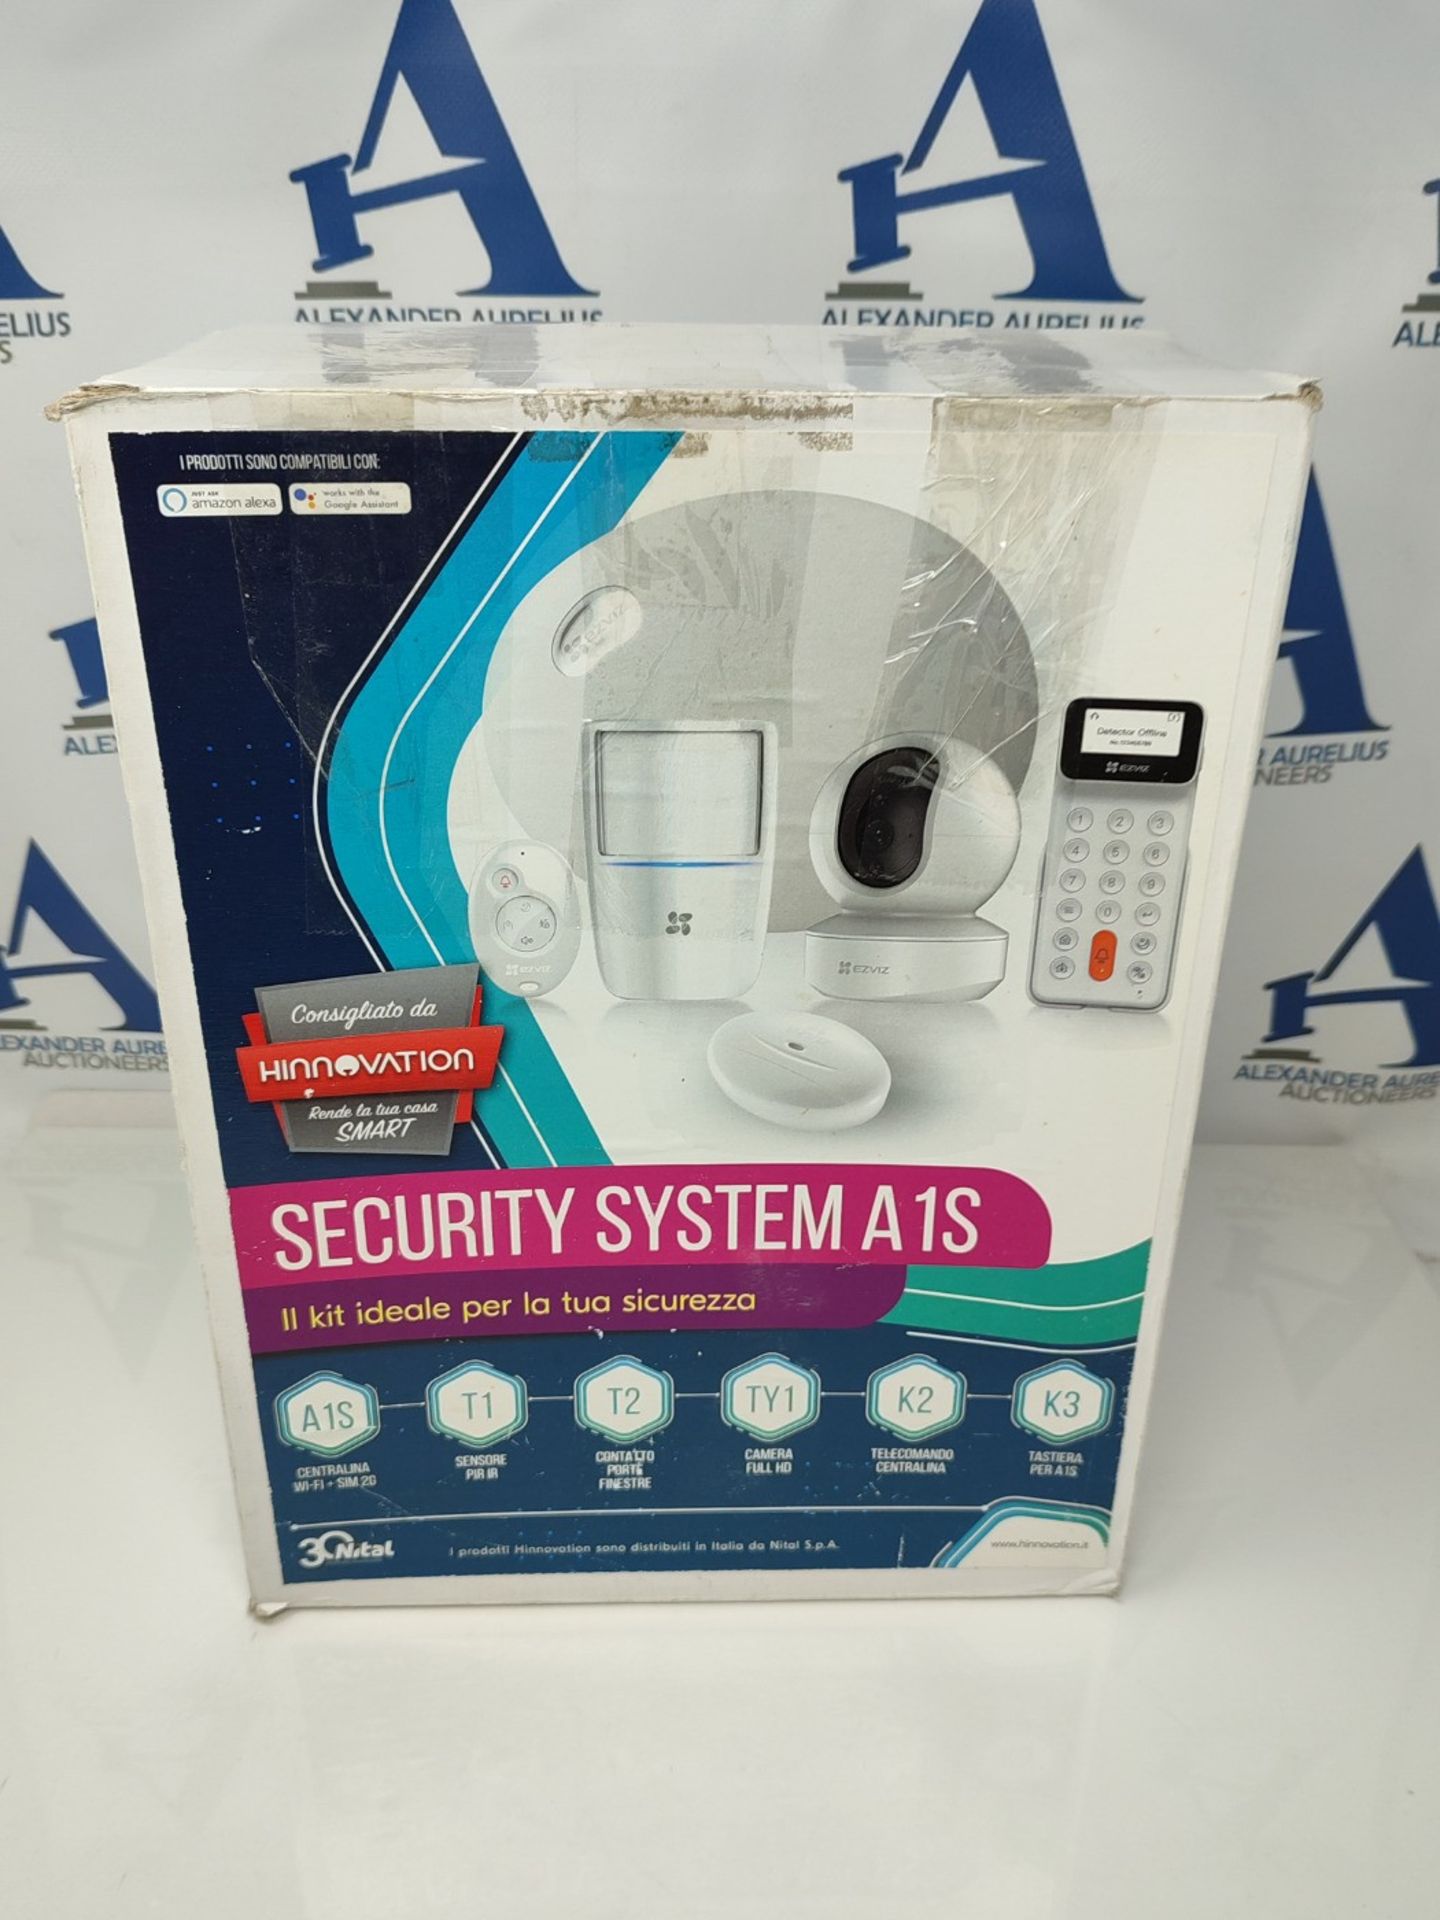 RRP £321.00 Hinnovation A1S Security Kit Consisting of TY1 Motorized Indoor Camera, T1 Infrared Mo